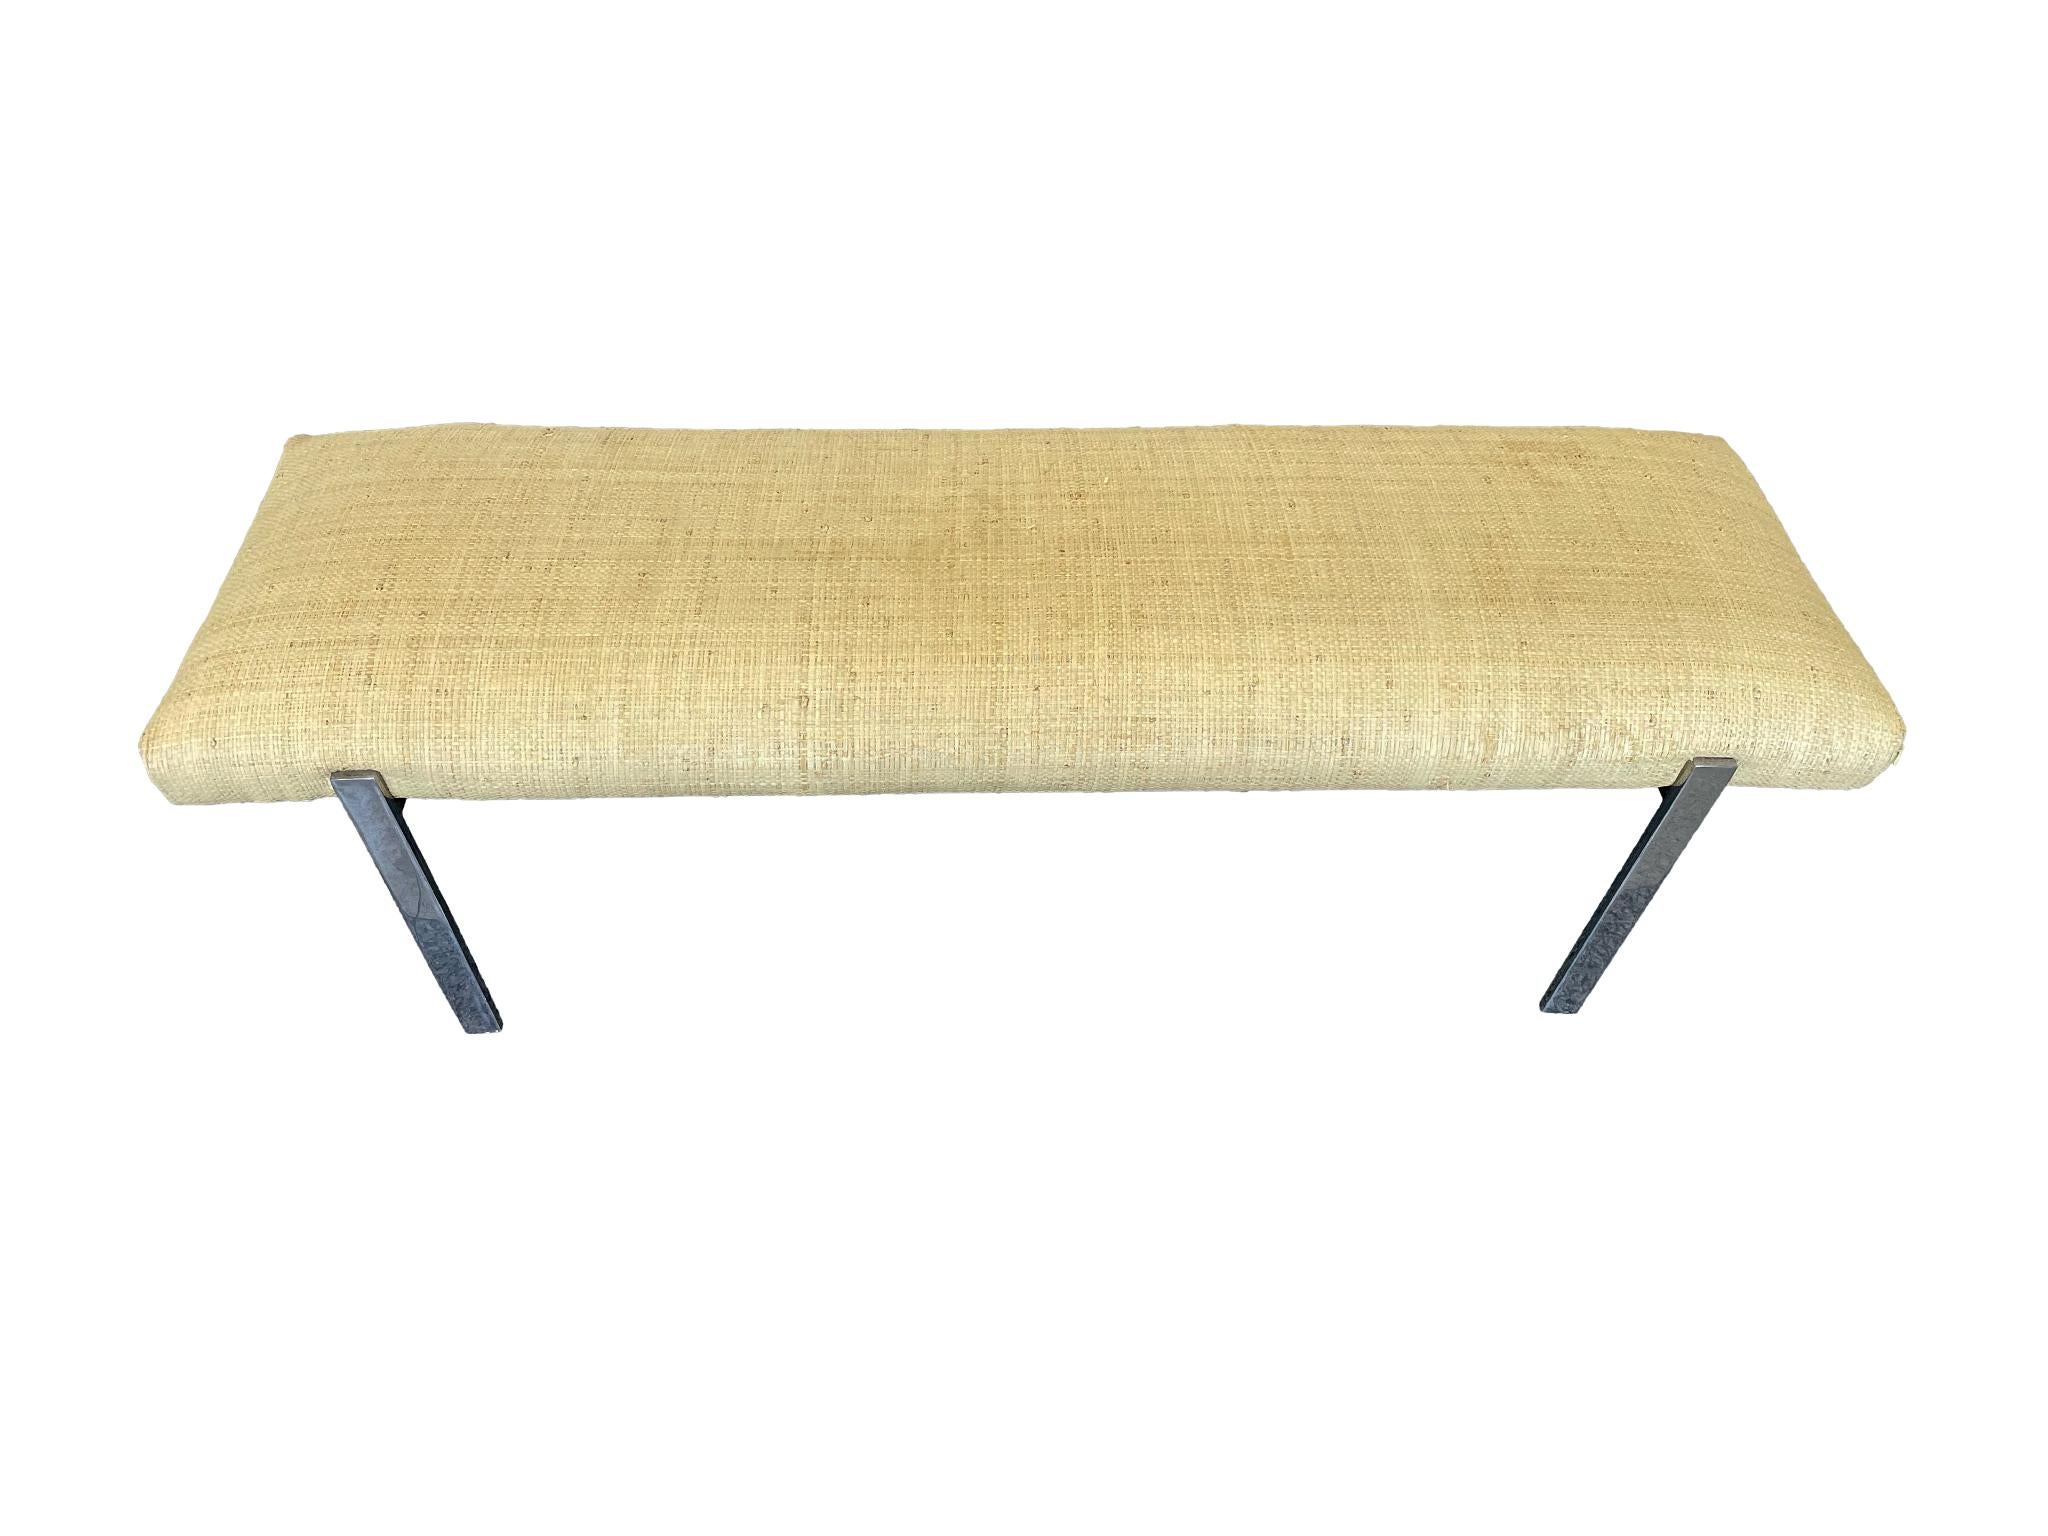 Mid to late 20th Century bench designed in the the style of Karl Springer. Much like his designs, this bench combines a minimalist form with richly textured and contrasting materials. The upholstery is grasscloth, while the legs are chrome.